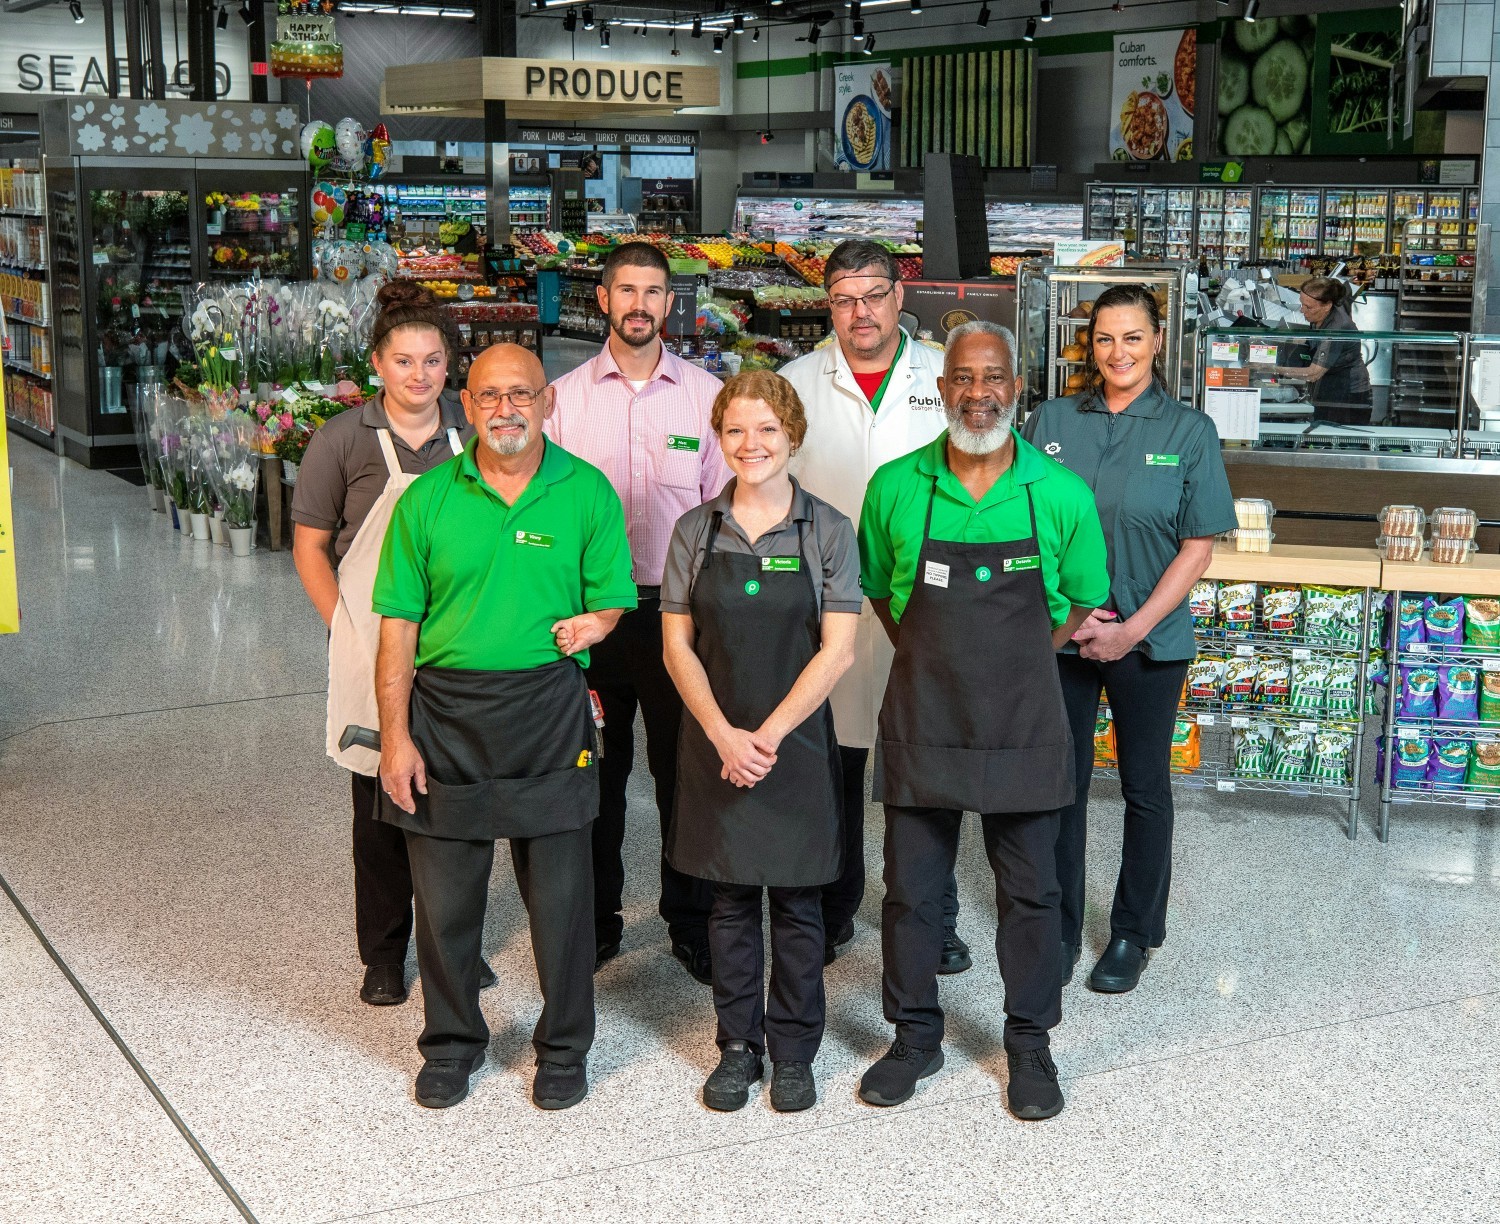 A great thing about working at Publix is our associates shape their future and the future of this company that they own.